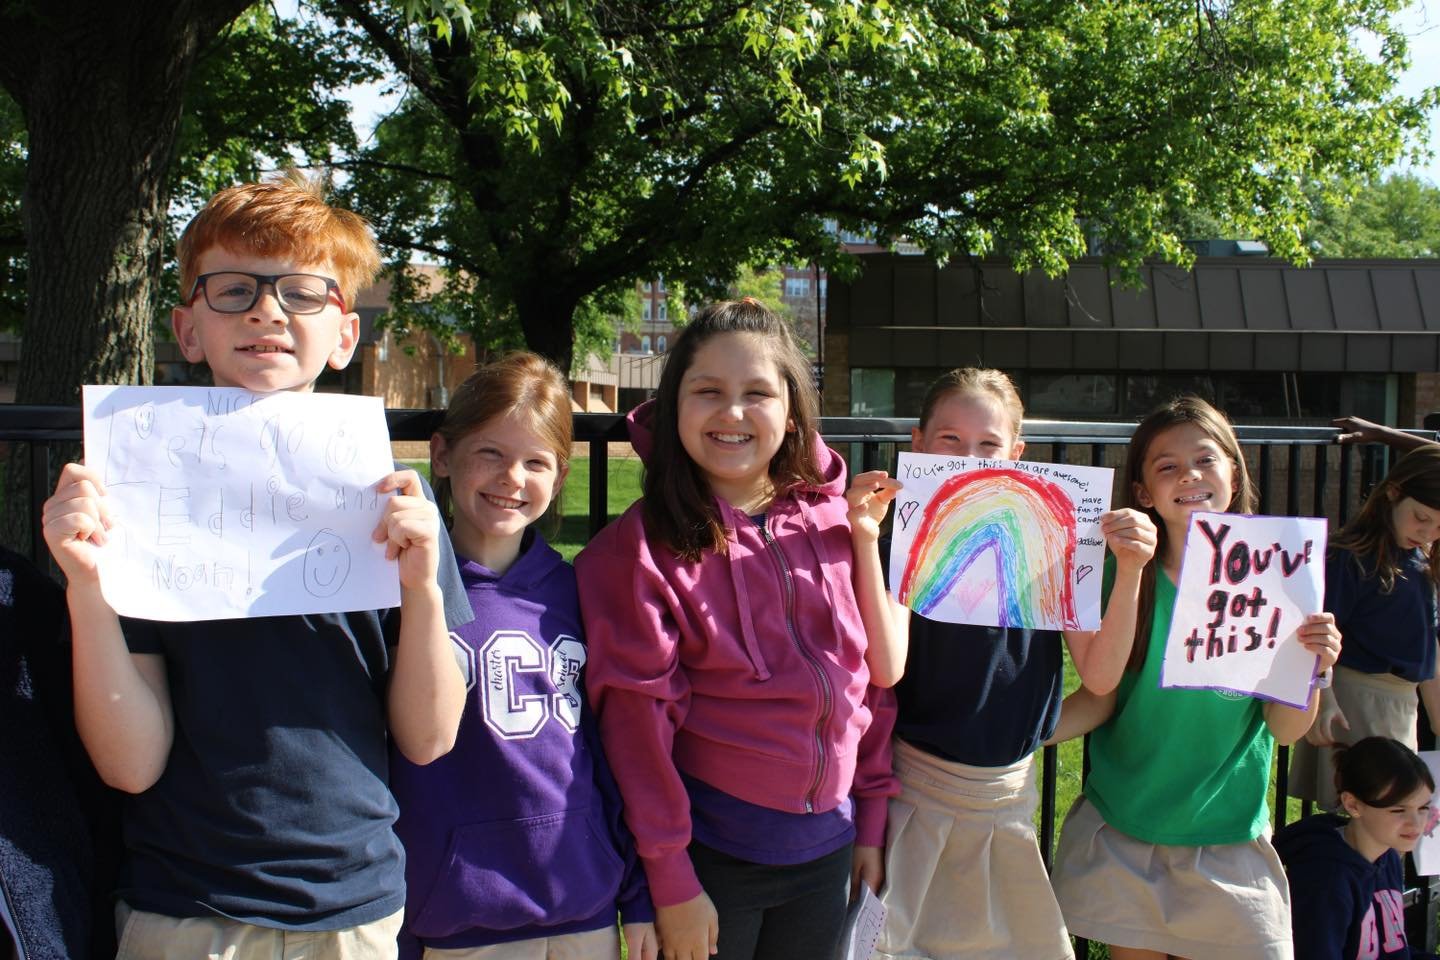 And they're are off to camp ⛺️🧡

Our 4th Graders made posters and formed send-off lines to send good vibes an well wishes for our 5th graders who left for camp this morning! 

Have so much fun 5th grade--we can't wait to hear about all about it! 

#